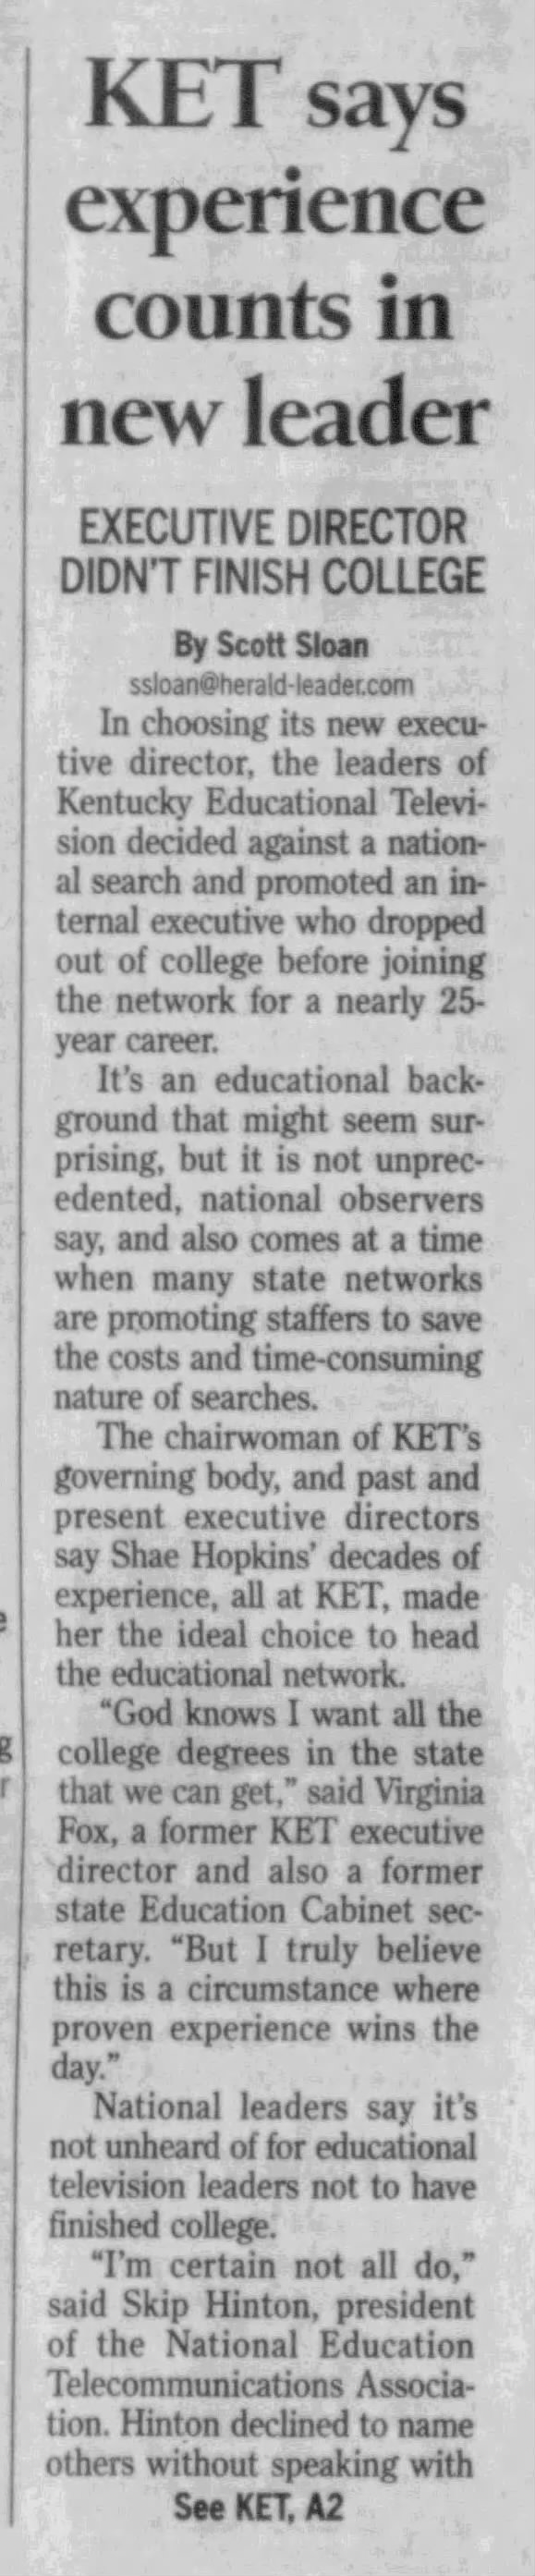 KET says experience counts in new leader